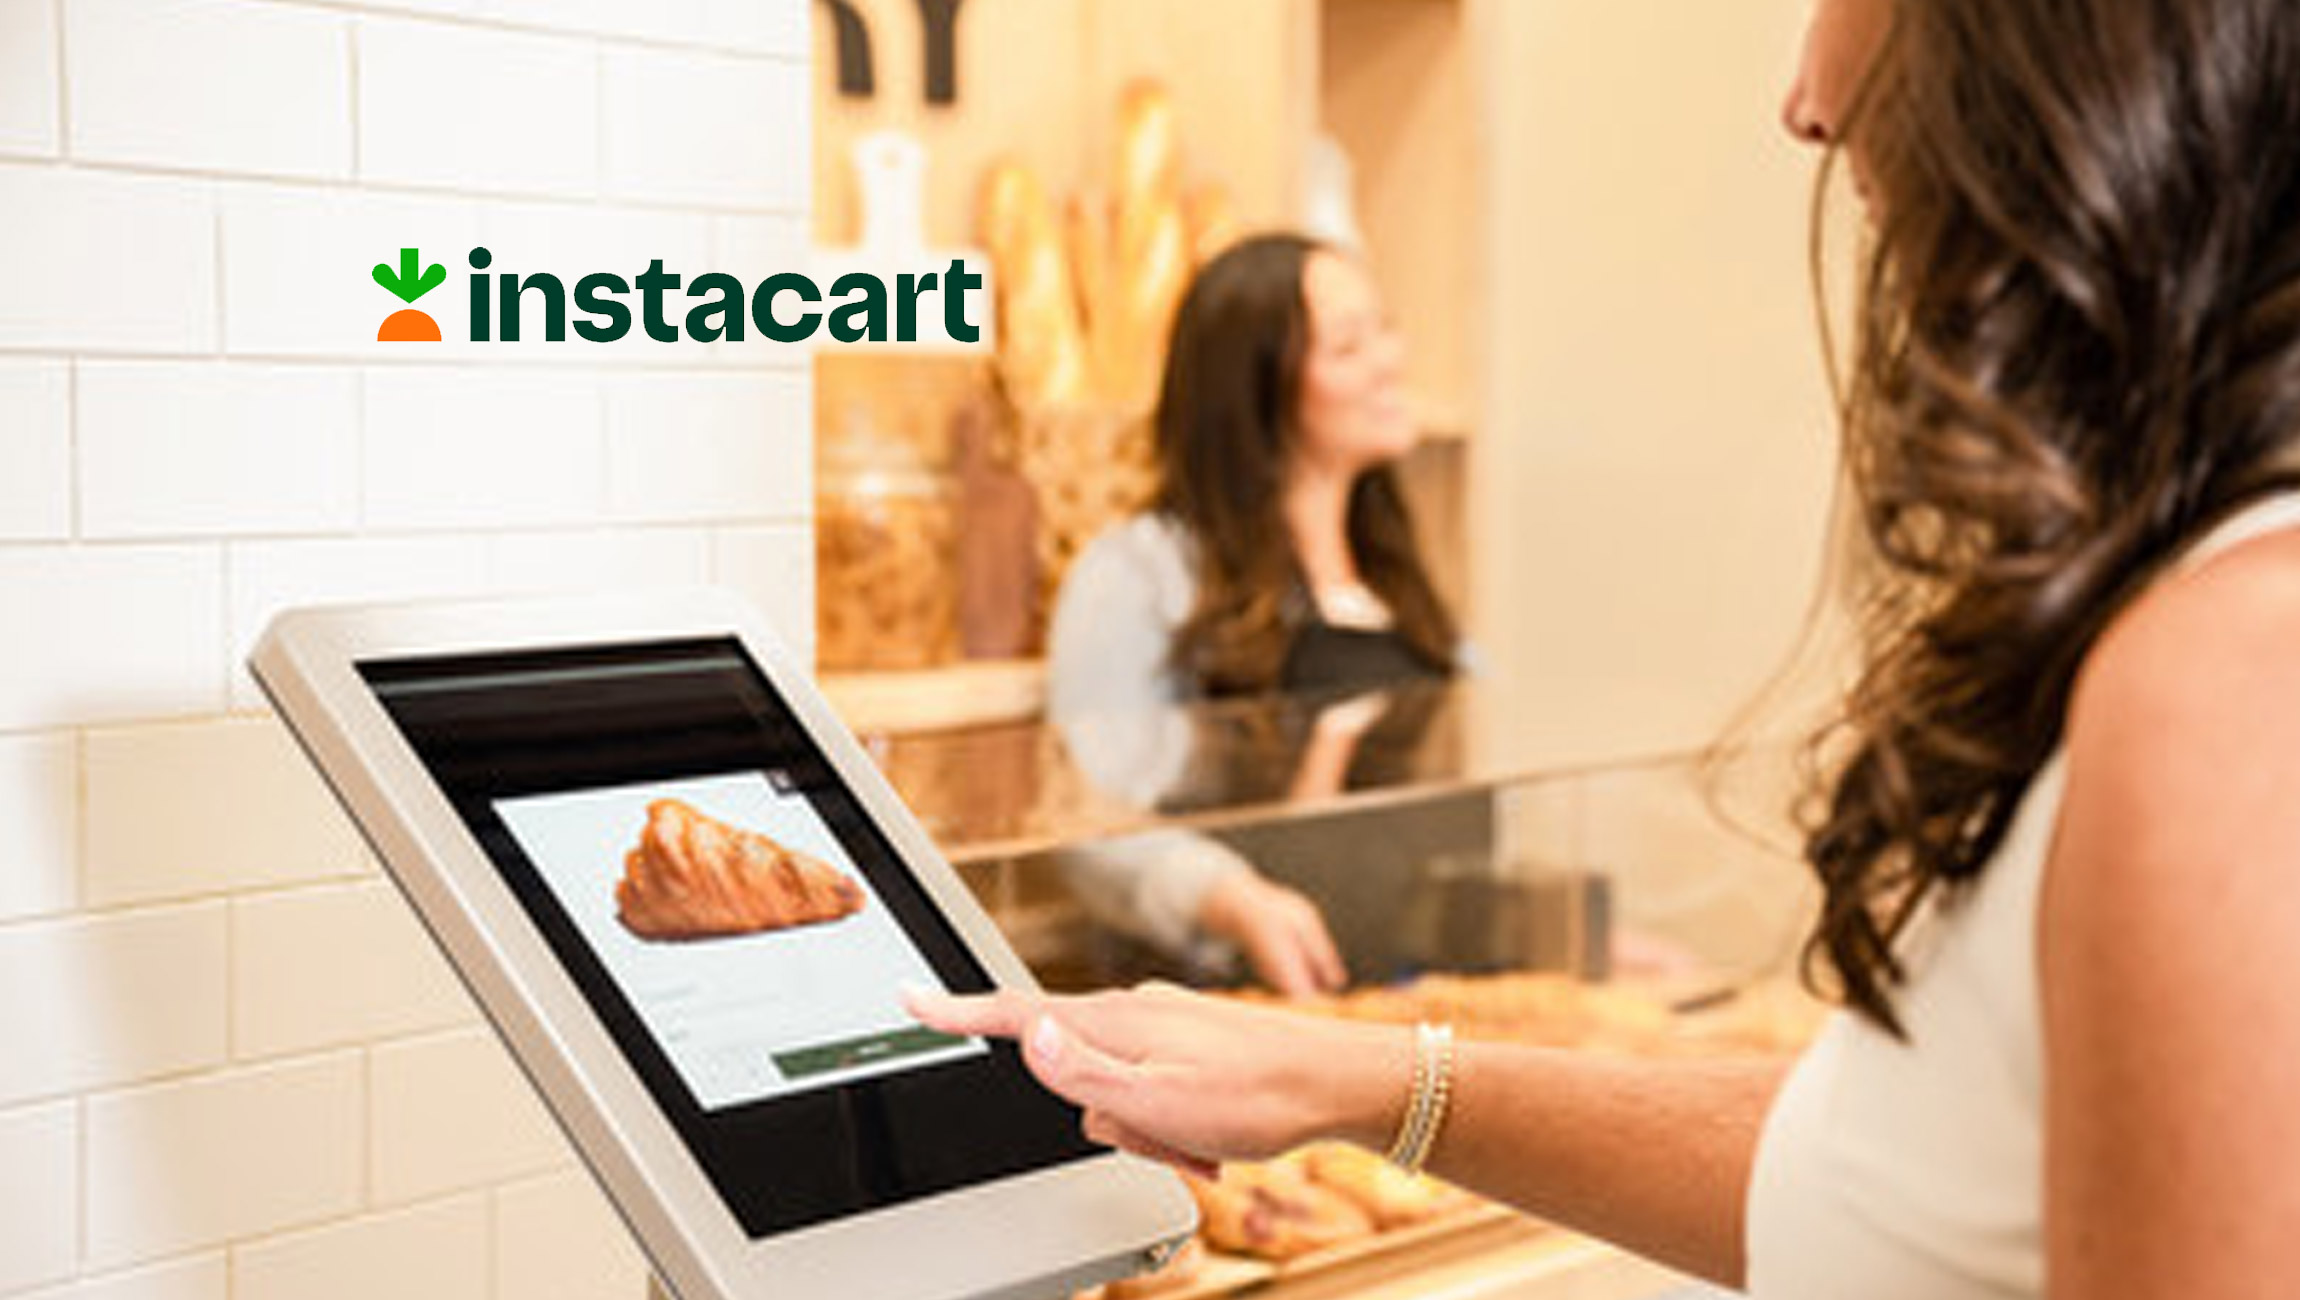 Instacart-Announces-'Connected-Stores'-Technology-to-Help-Grocers-Seamlessly-Unify-the-Online-and-In-Store-Shopping-Experience-for-Consumers (1)